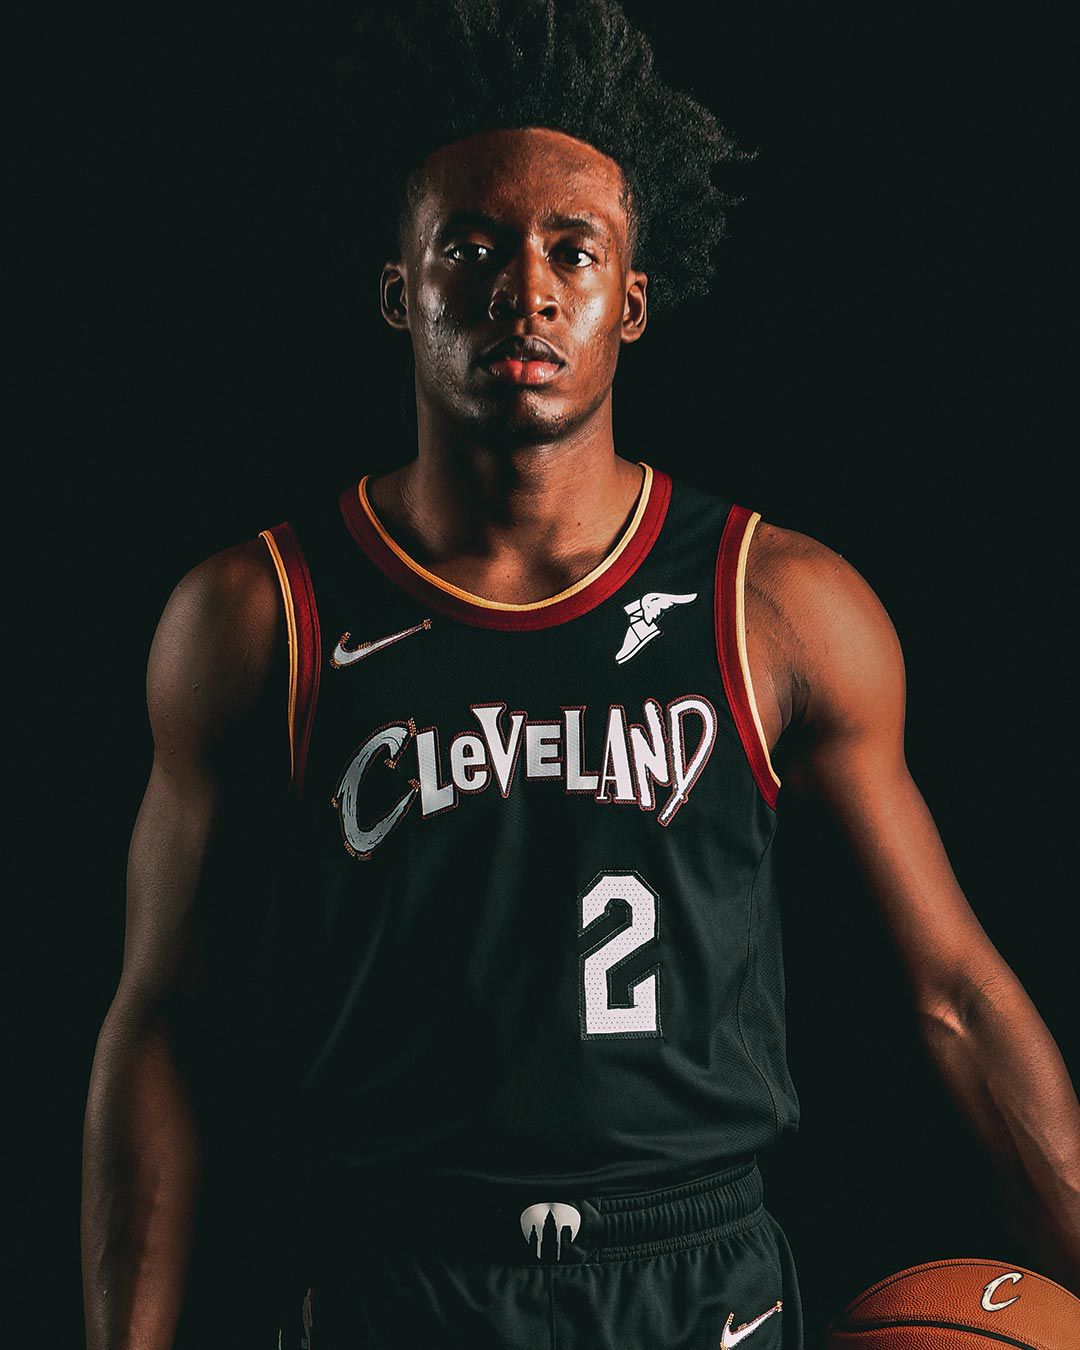 Cavs, Rock and Roll Hall of Fame team up for City Edition uniforms